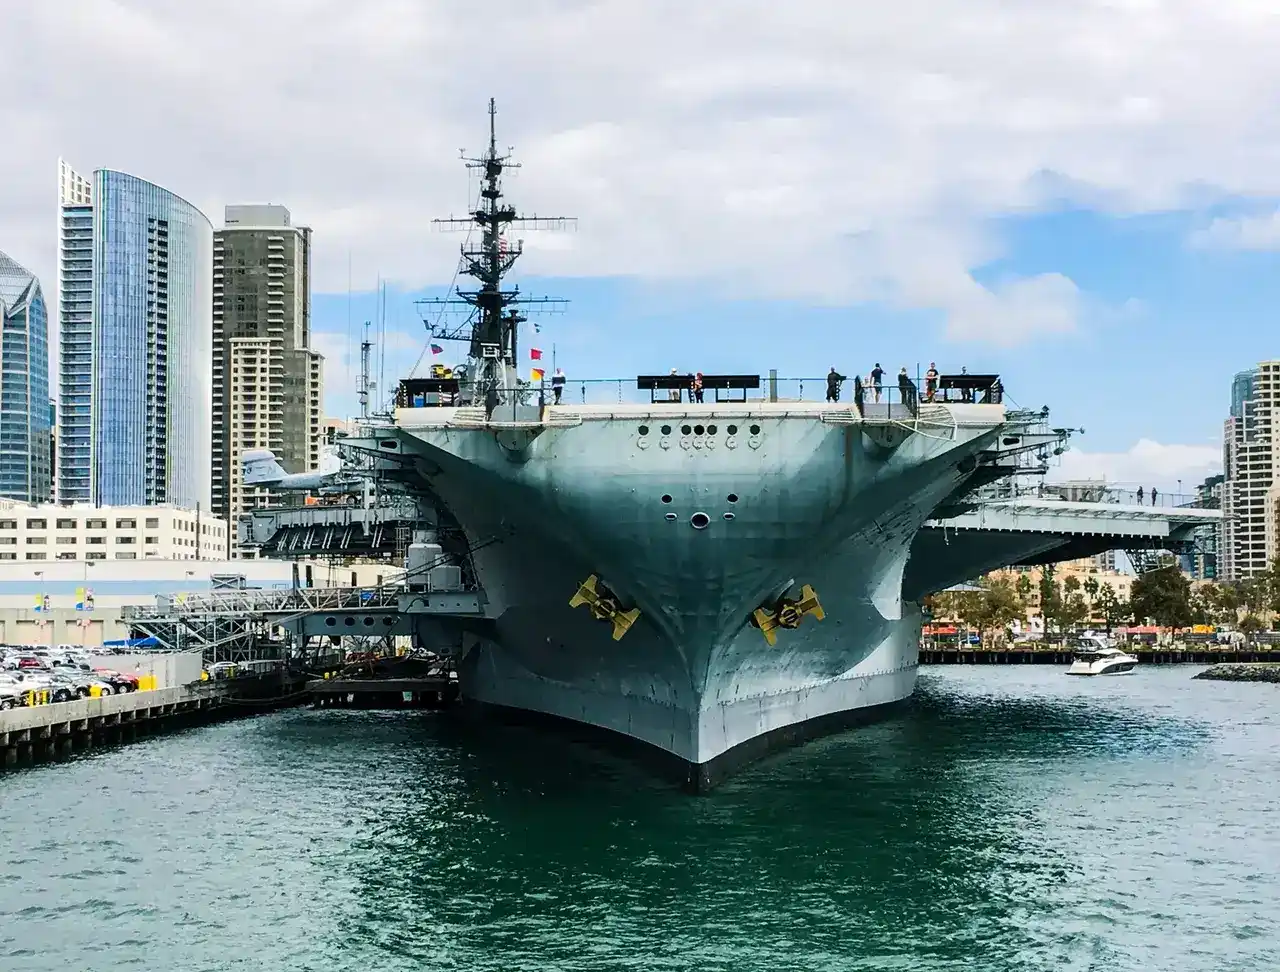 A view from a harbor cruise featuring the USS Midway Museum and Coronado